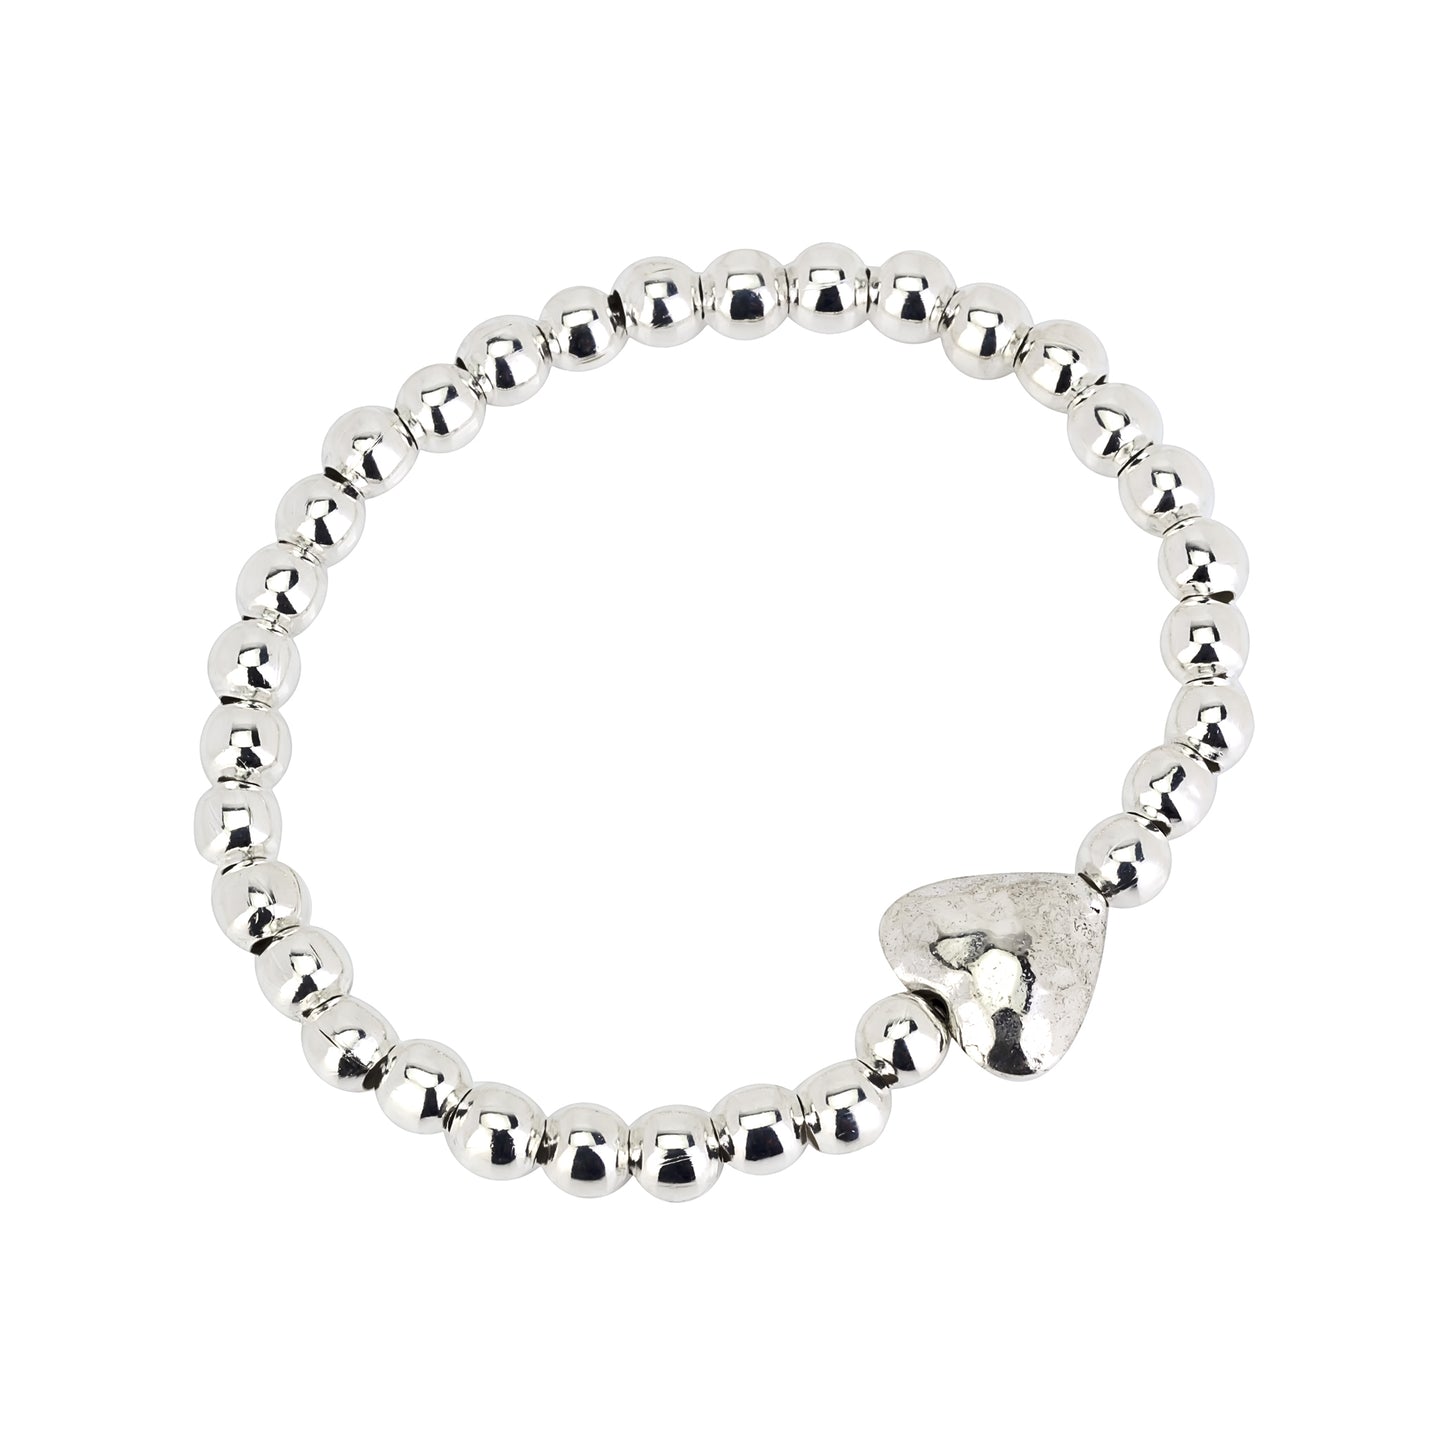 Love is all around you - Silver plated heart bracelet by Luna London